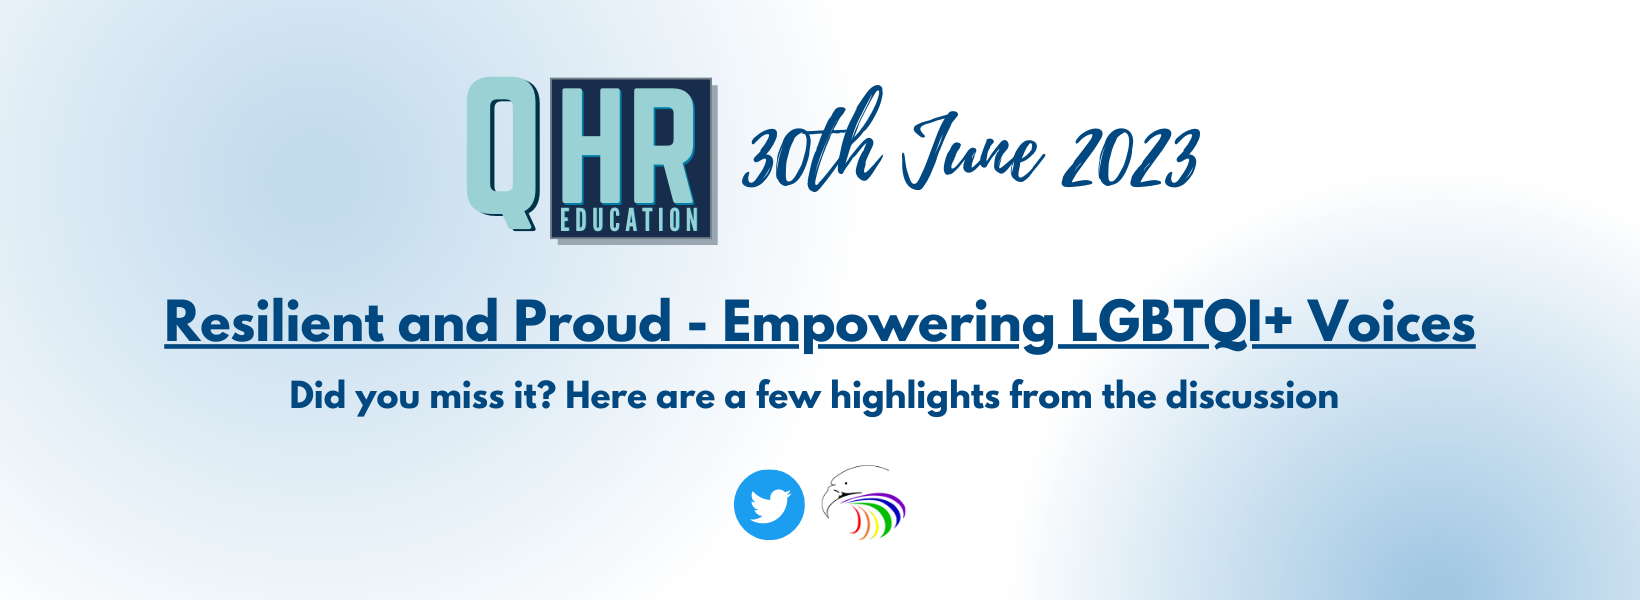 Resilient And Proud: Empowering LGBTQI+ Voices In Nigeria – A Recap Of June QHRE Twitter Space Event